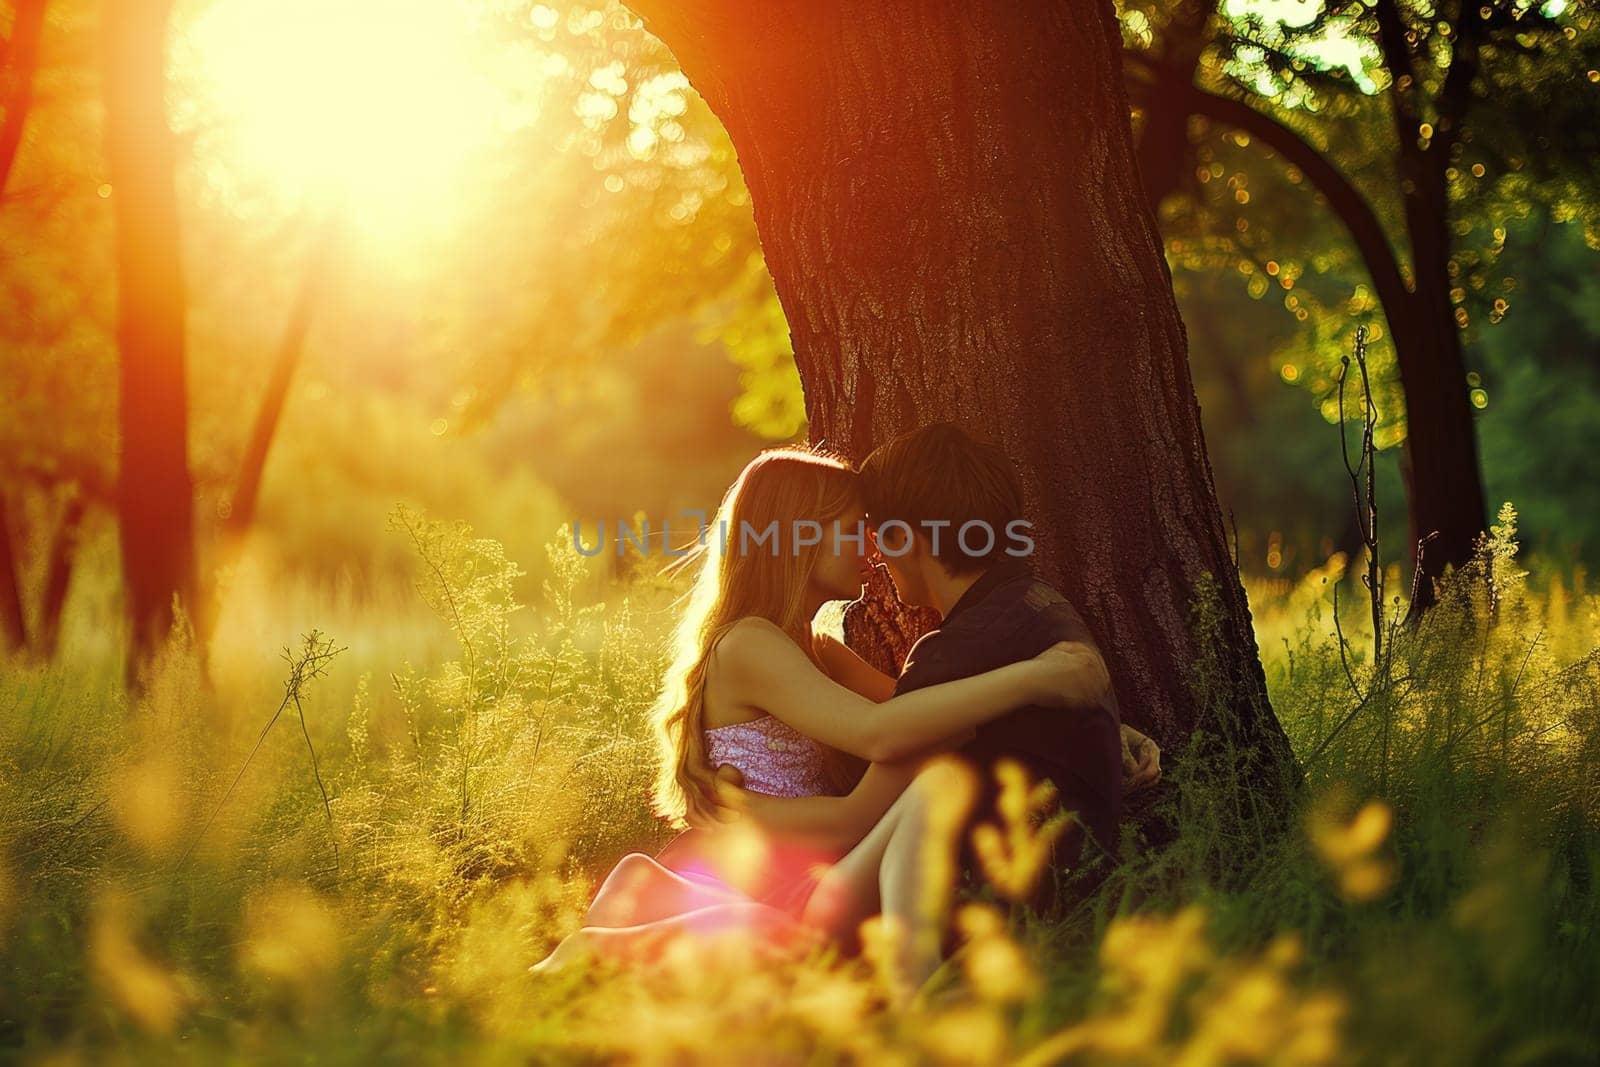 The picture about couple hugging each other has been surrounded with grass under the tall tree in the forest bright by light of daytime in morning or evening at dawn or dusk time of the year. AIGX01.